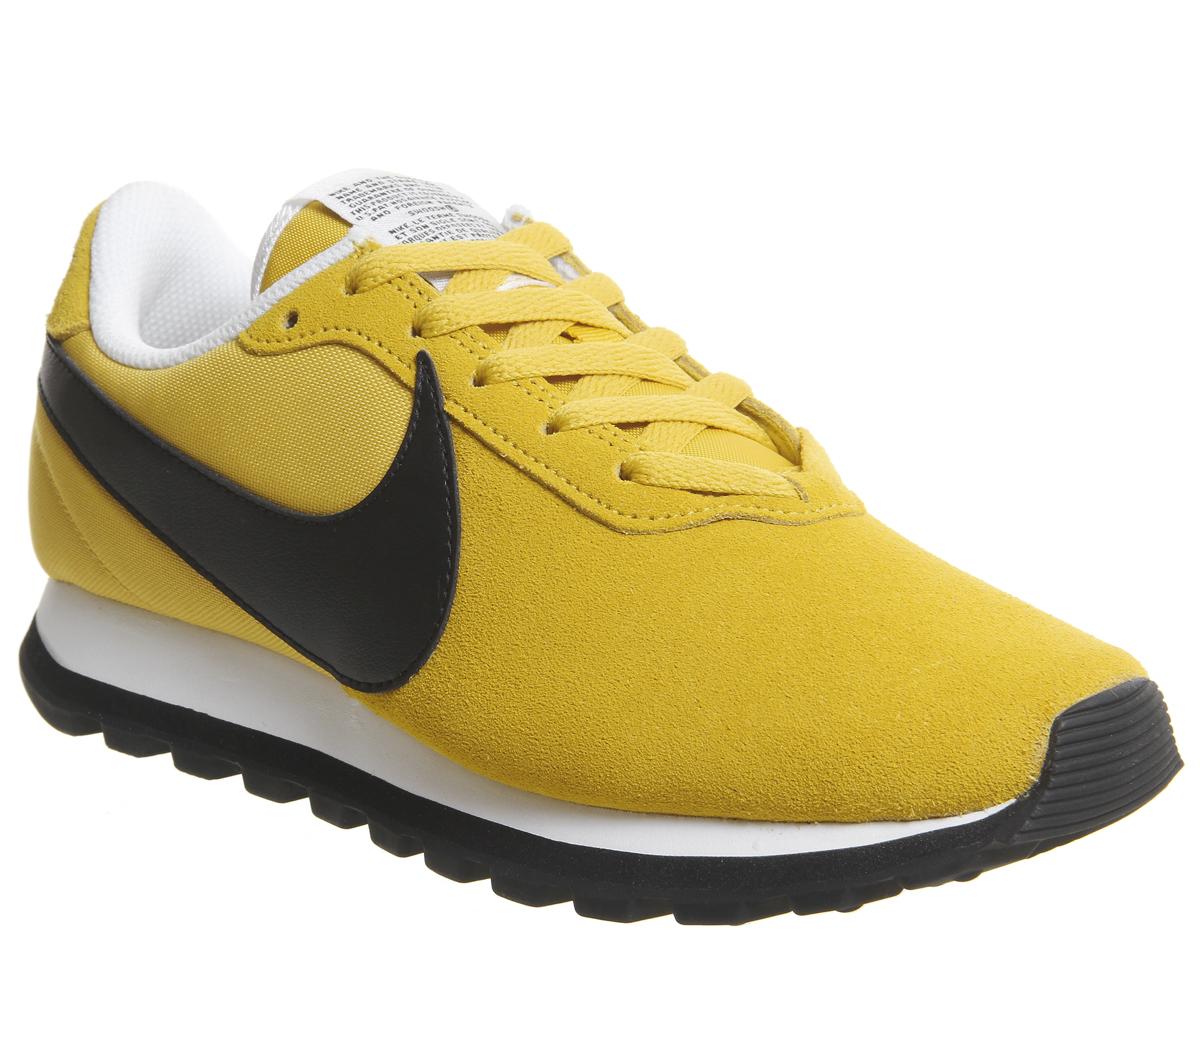 nike white and yellow trainers